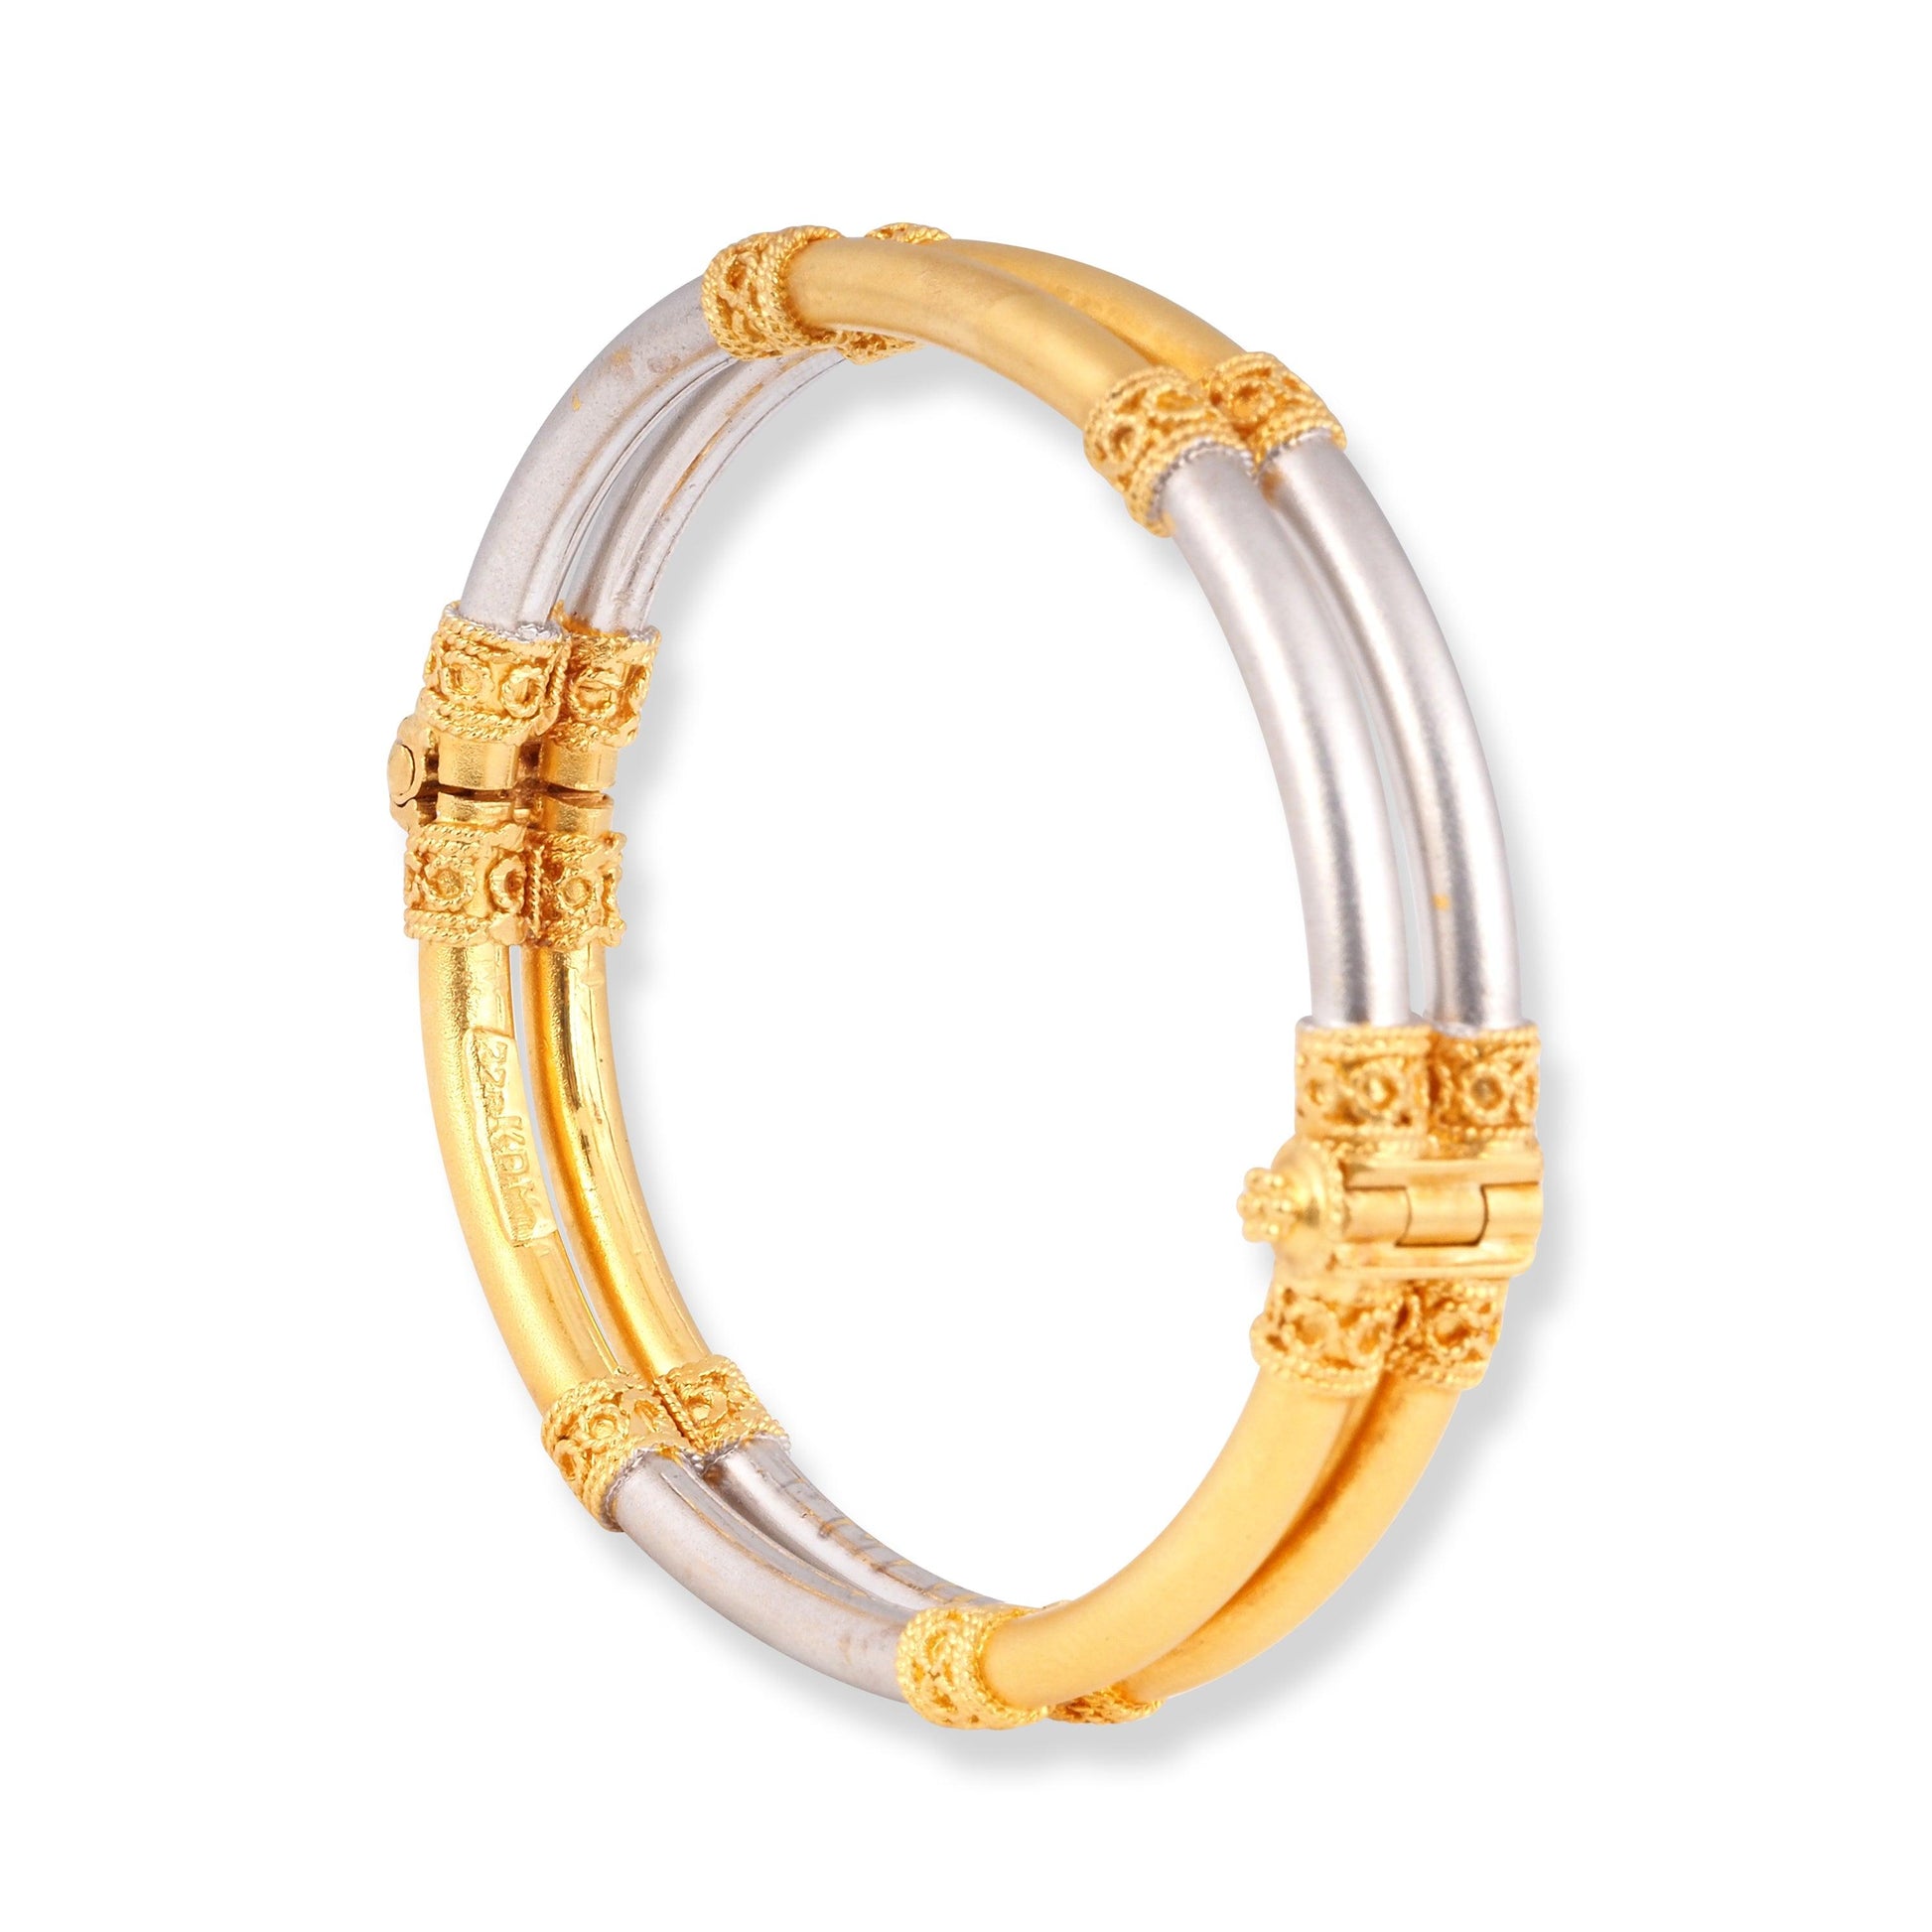 22ct Yellow Gold Openable Bangle with Rhodium Plating Design at Intervals B-8565 - Minar Jewellers